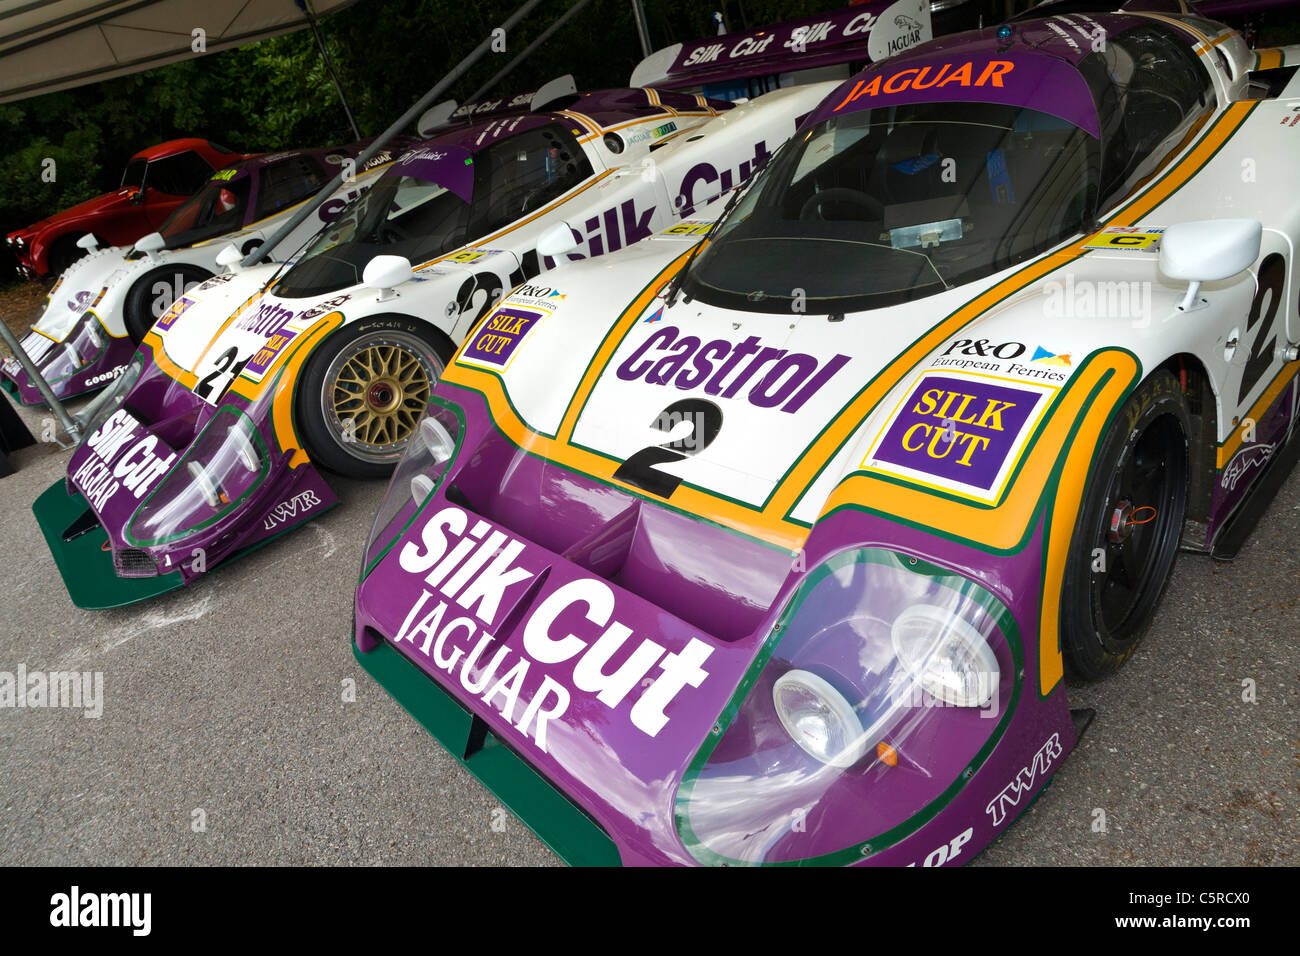 Le Mans winning 1988 Jaguar XJR9LM cars in the paddock at the 2011 Goodwood Festival of Speed, Sussex, England, UK. Stock Photo